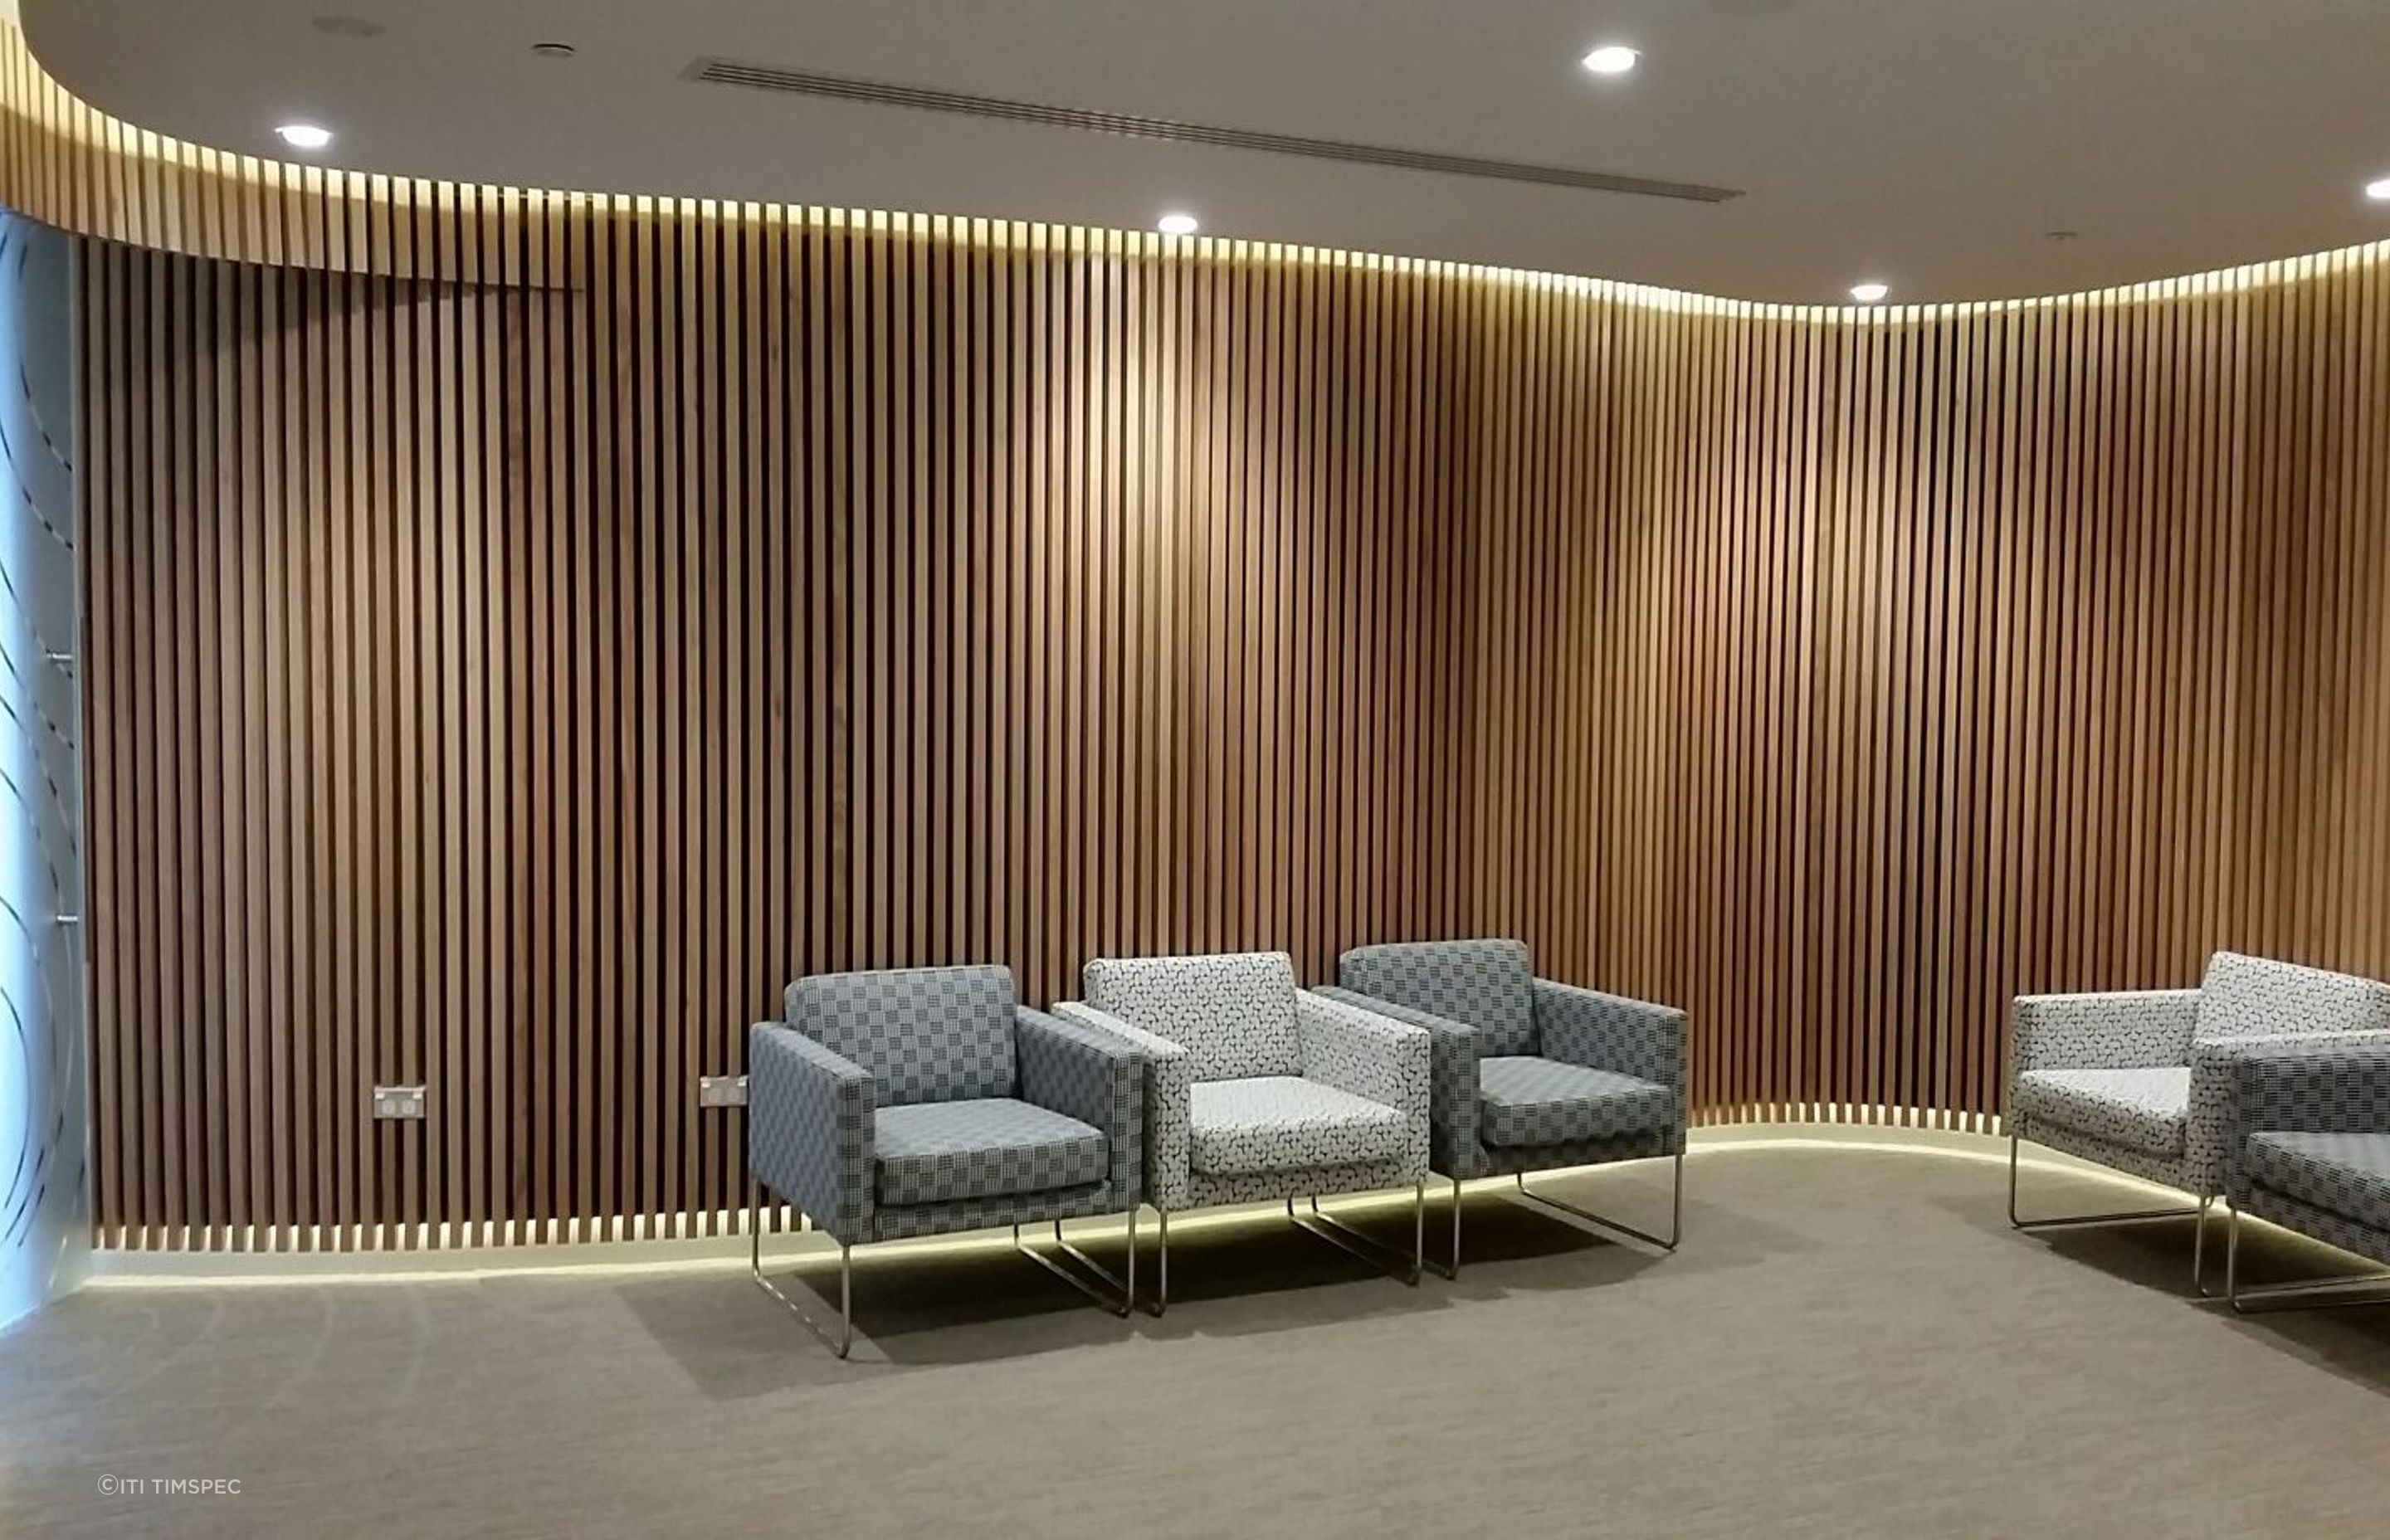 ITI Timspec recently completed a timber fitout for the Auckland Eye Institute where the interiors needed to evoke feelings of relaxation.